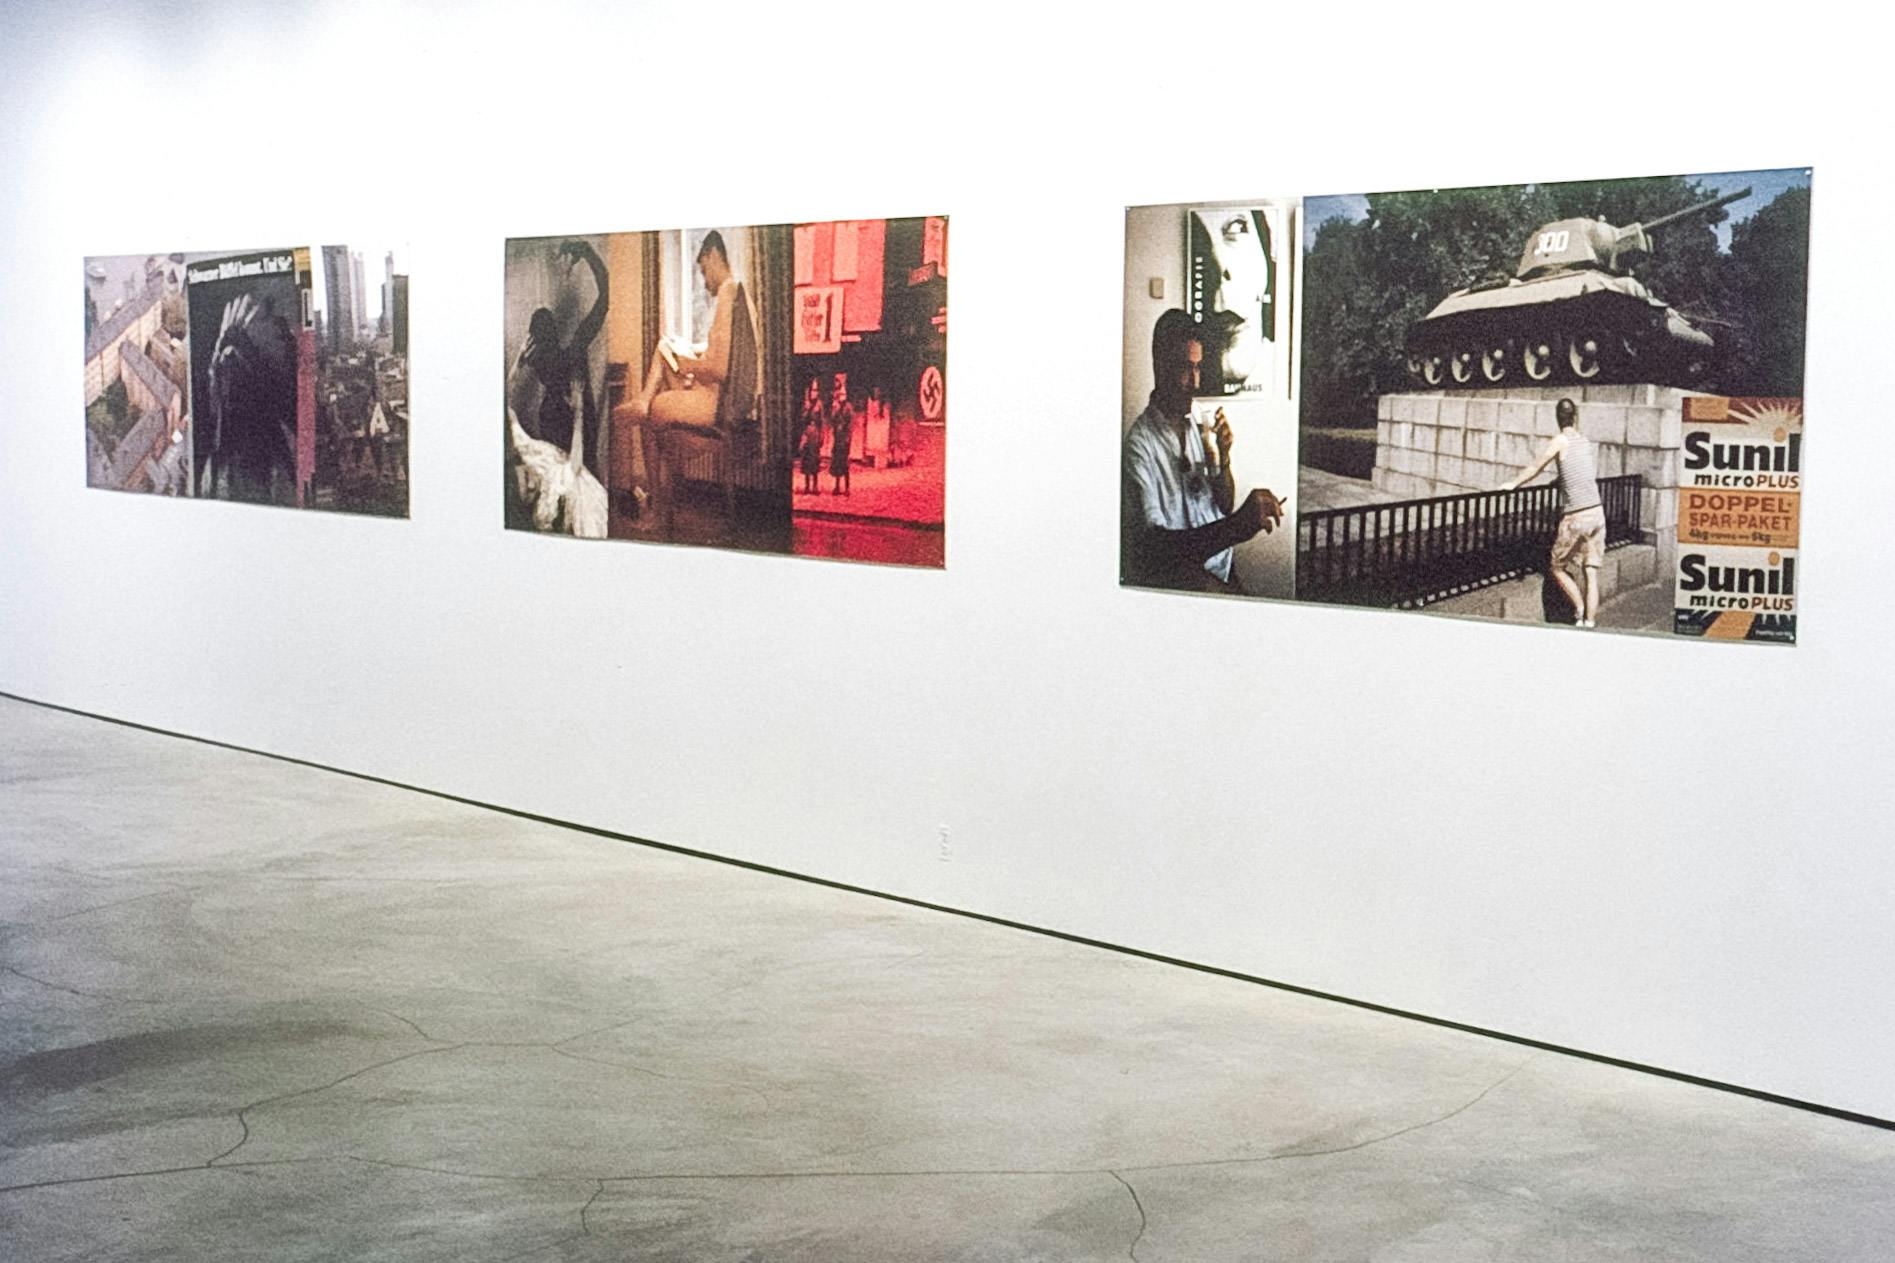 Three large horizontal works on a gallery space. The pieces have 2 or 3 photos included in each. The photos include a birds-eye view of a building, a naked person reading, and a person smoking. 